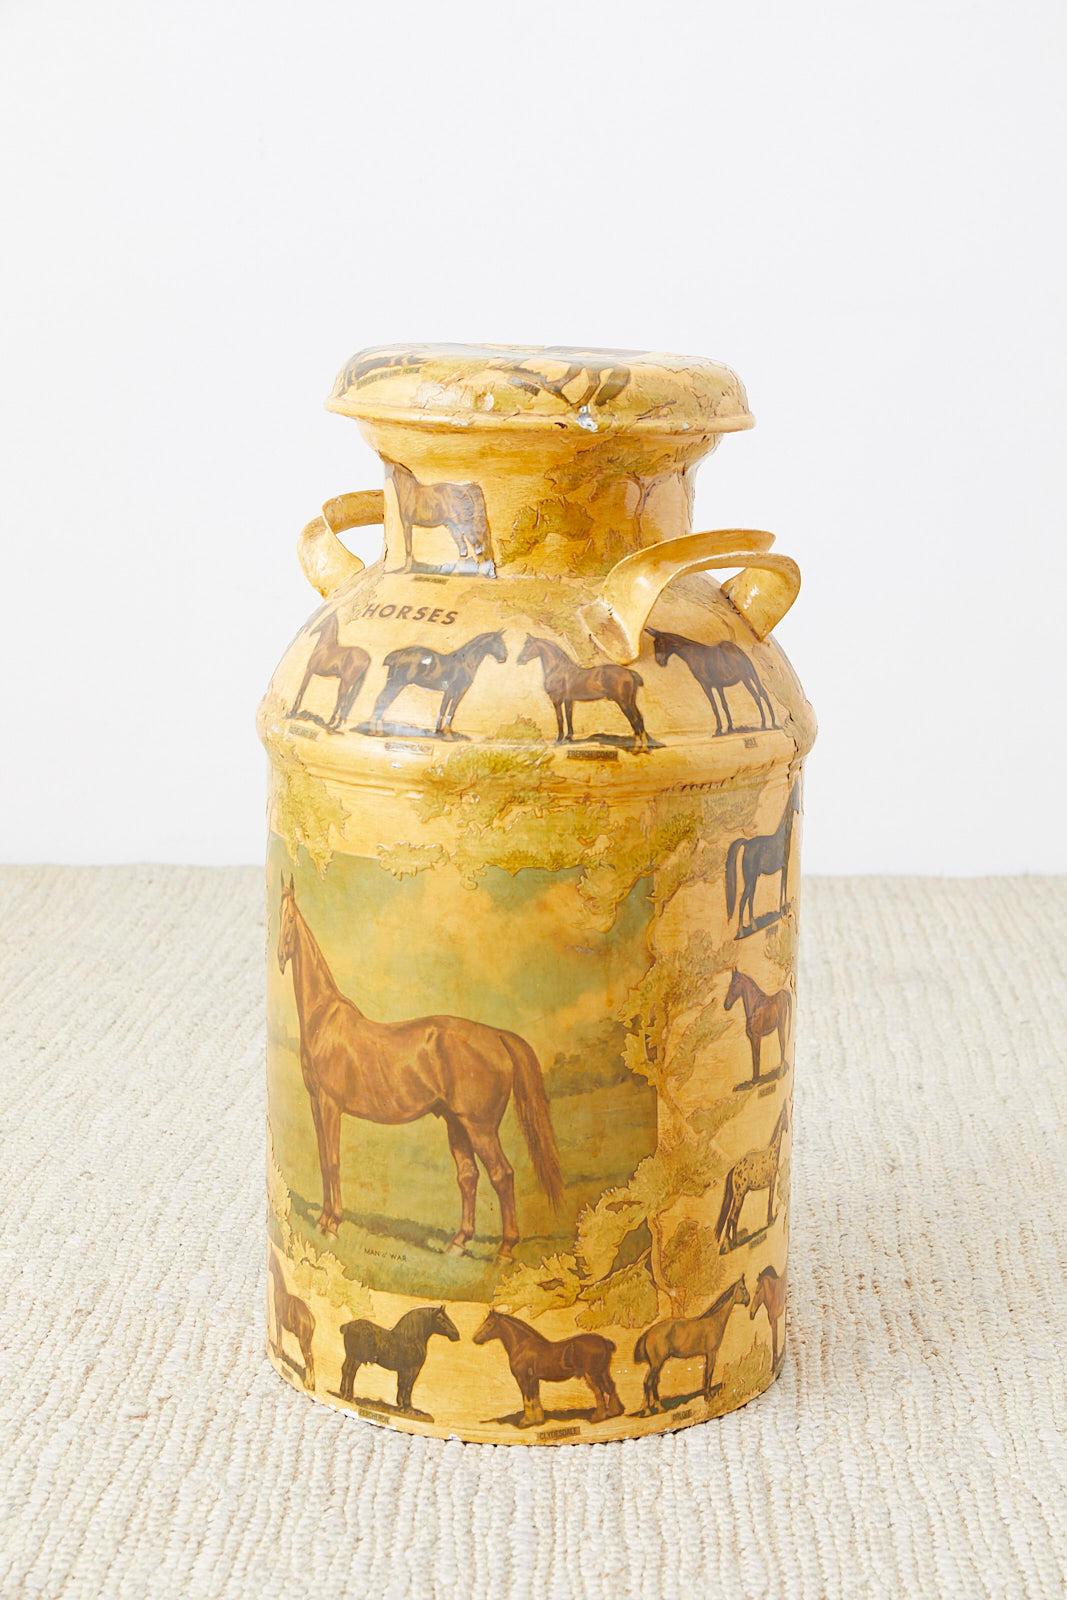 Whimsical decoupage decorated New England dairy farm lidded milk jug or bottle. Features an equine motif with images and labels of horses over a lacquered ground. Reminiscent of vintage Hermes scarf artwork in a folk art style. Heavy and solid metal